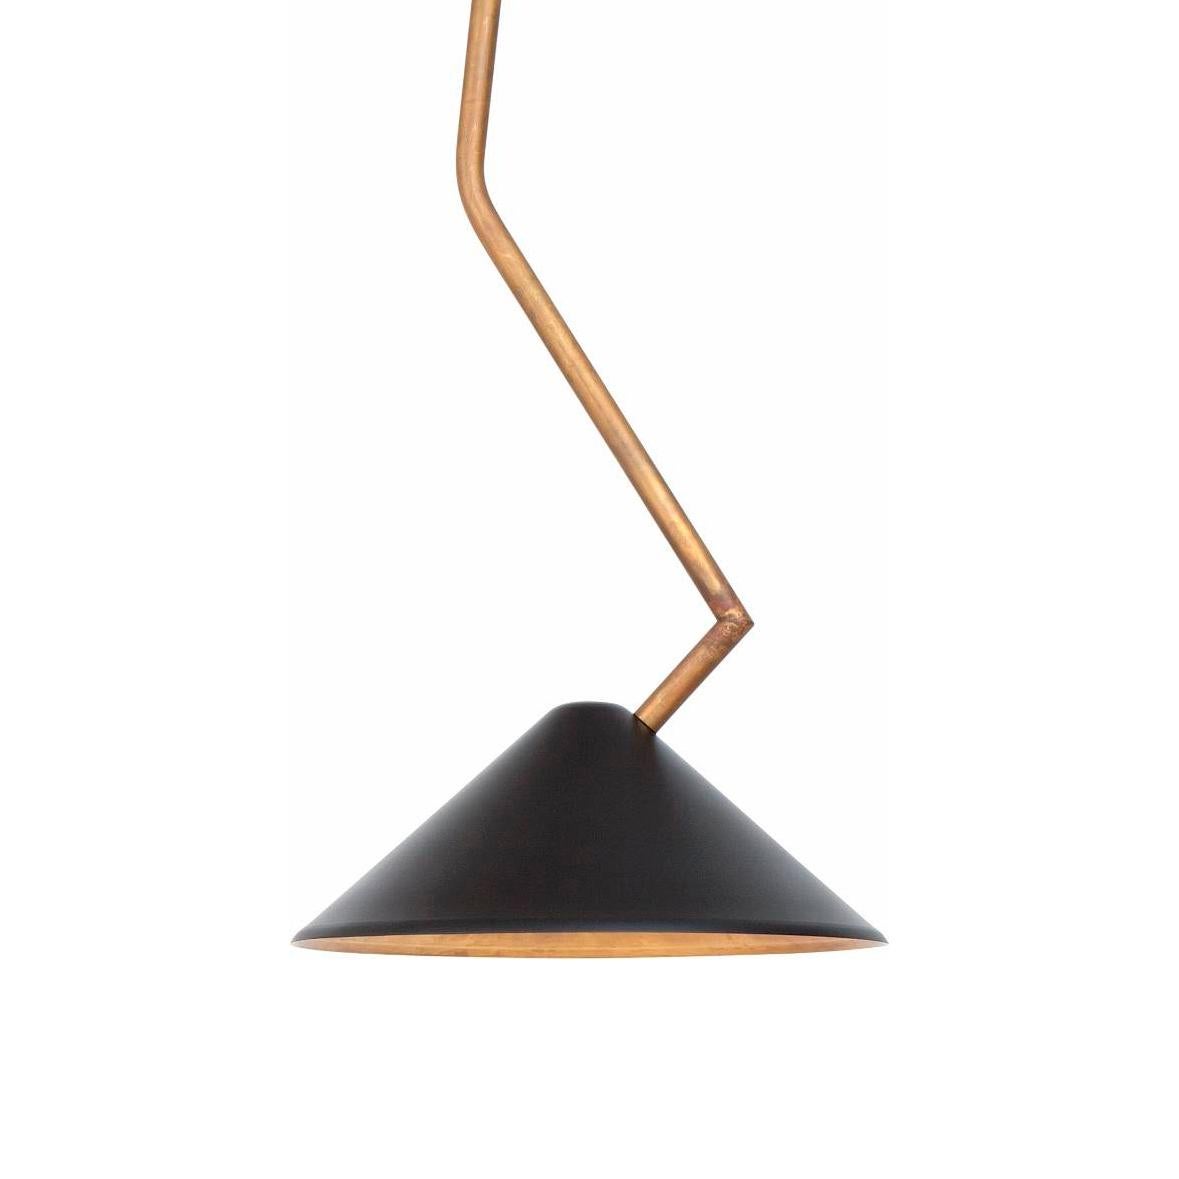 Ceiling lamp designed by Johan Carpner manufactured by Konsthantverk Tyringe in Sweden.

Grenverk ceiling
Measures: D 300 mm
H 750 mm
LED 5 W dimmable
Ceiling cup, hook mounted
3427-7 raw brass/black (one)

This lamp is wired for Europe, if used in